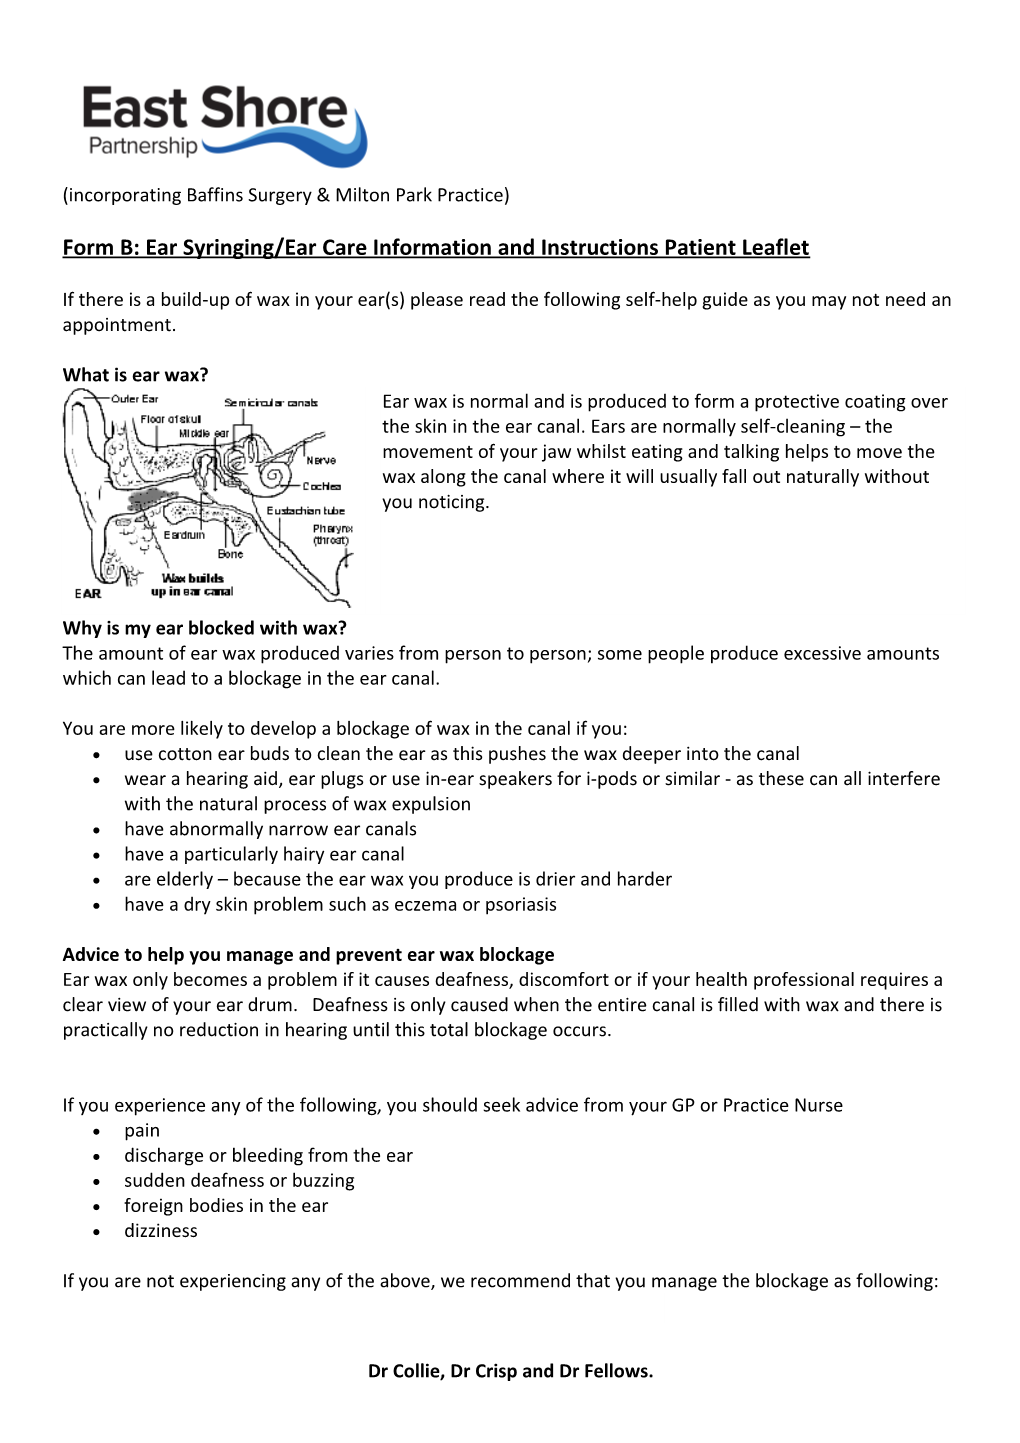 Form B: Ear Syringing/Ear Care Information and Instructions Patient Leaflet